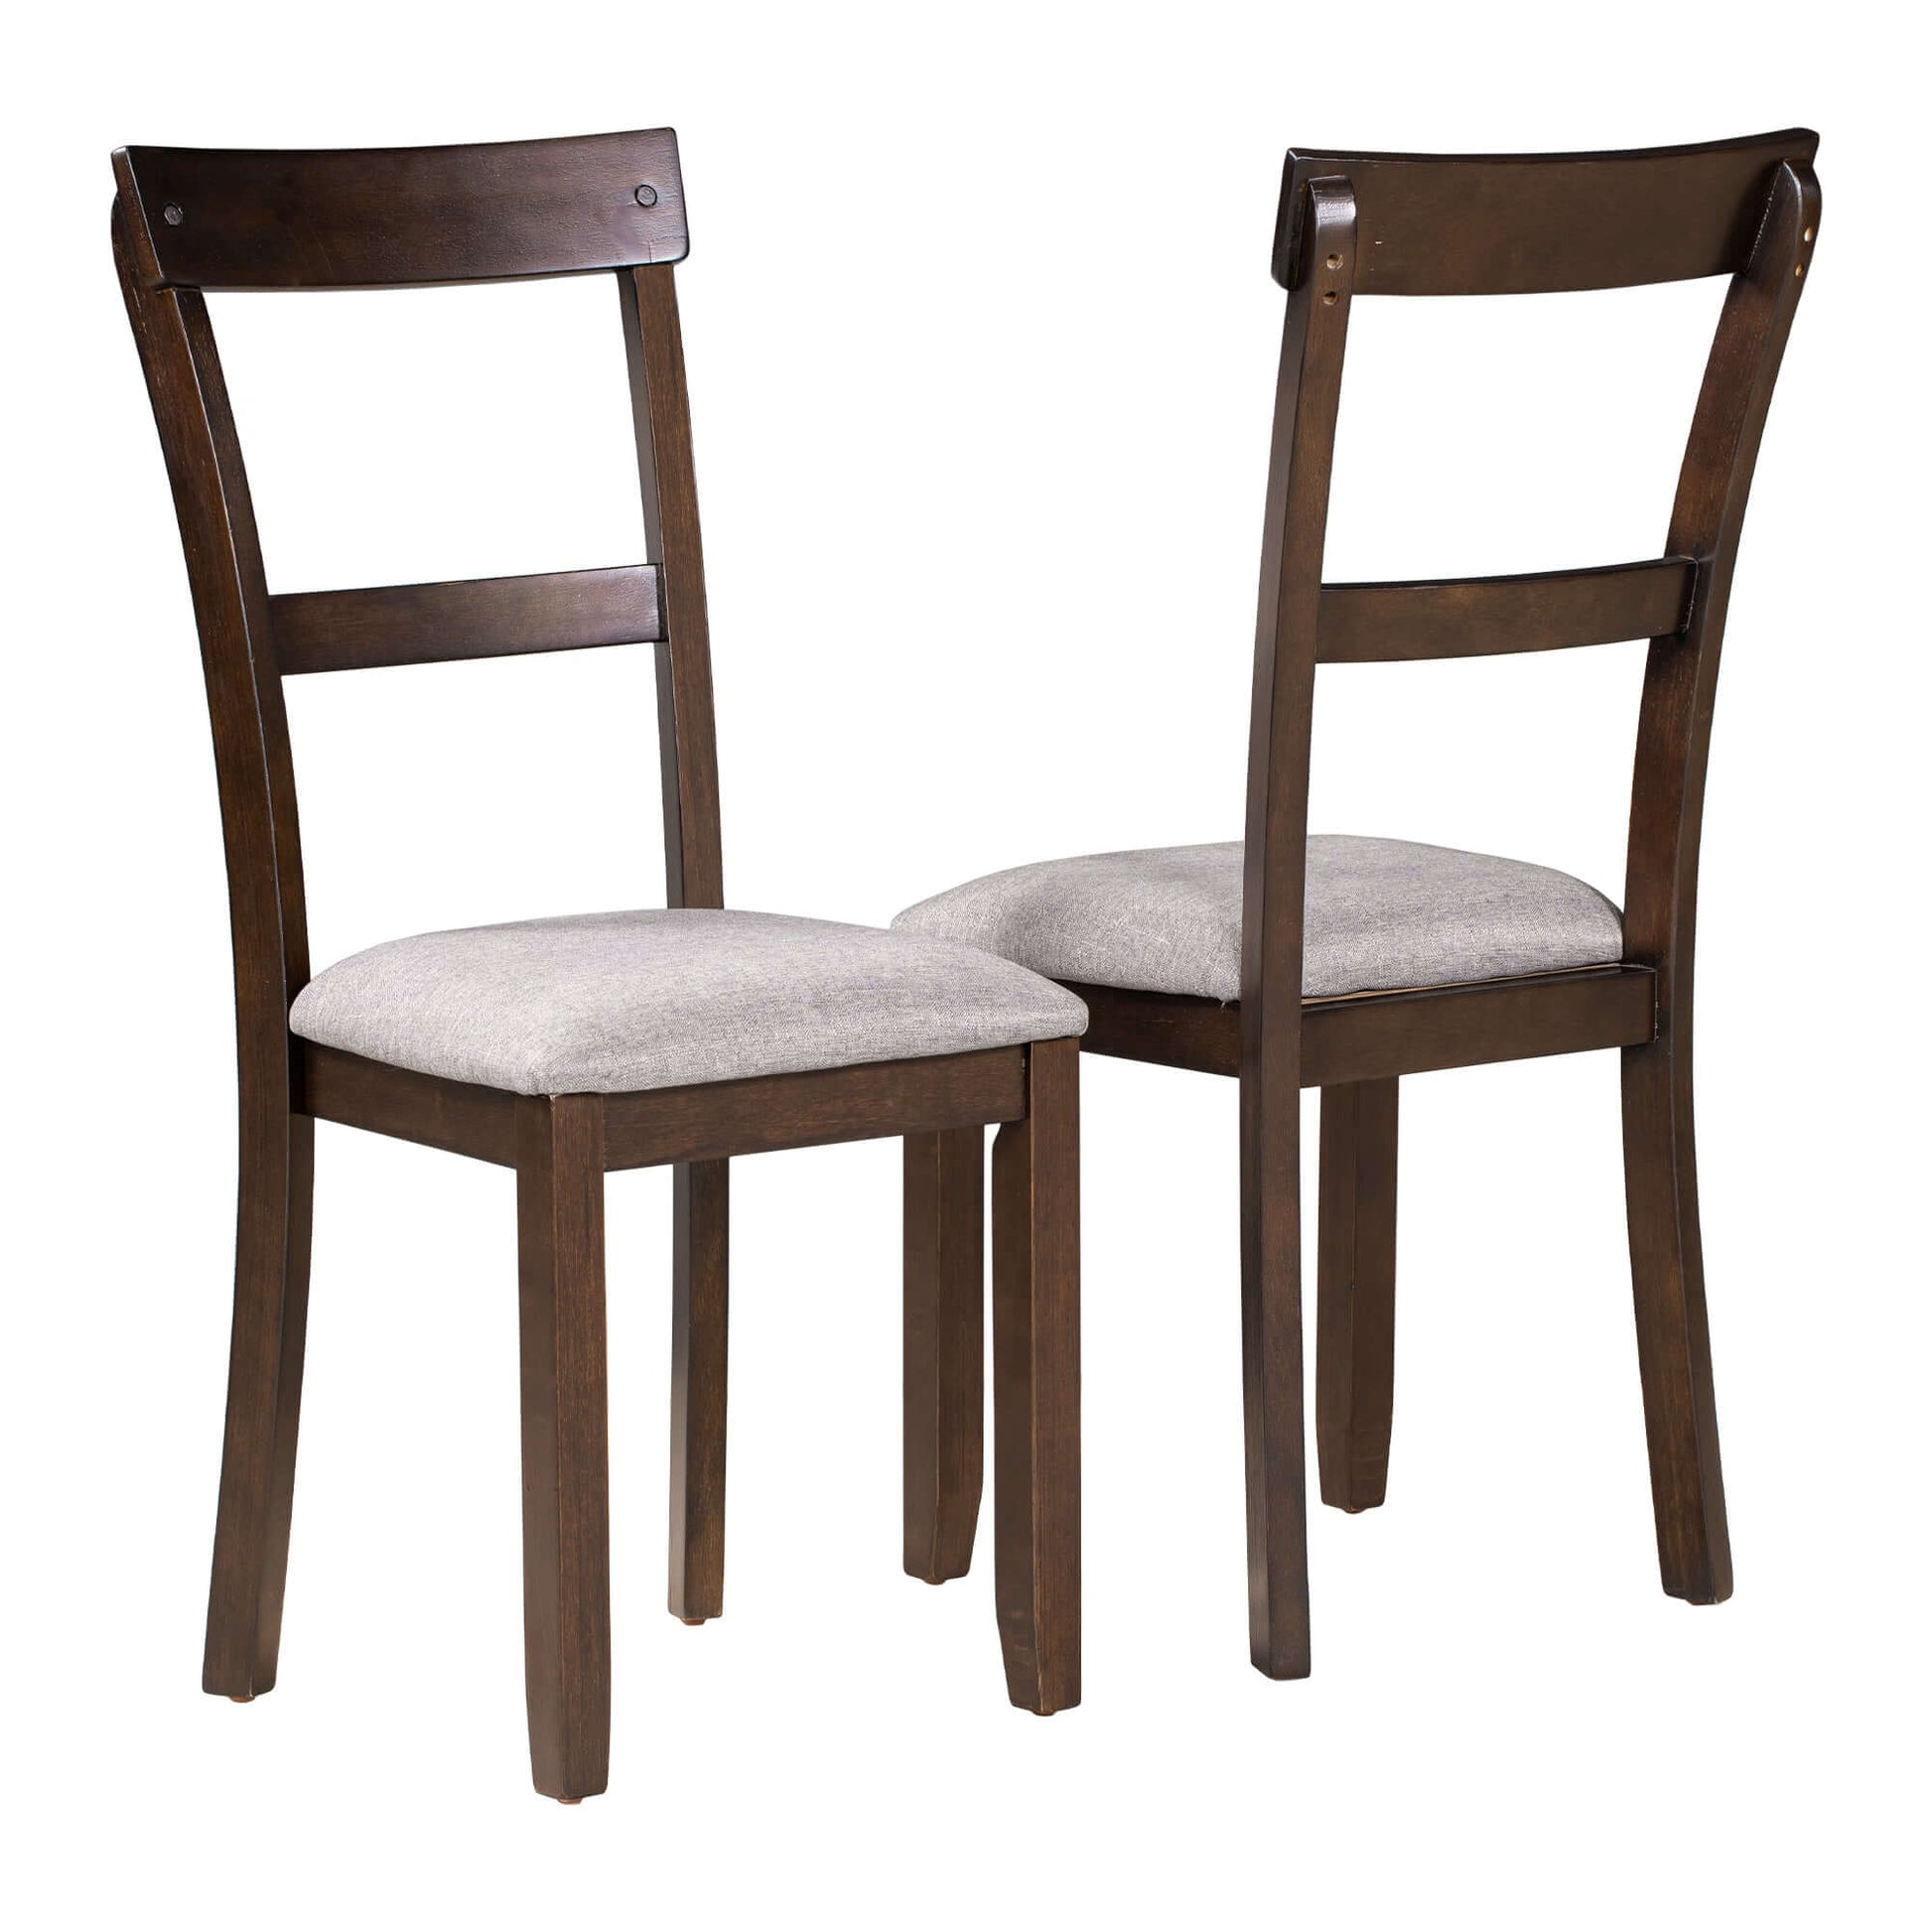 Two wooden dining chairs from the 5 Piece Dining Table Set in espresso finish with cushioned seats, showcasing industrial style for the dining room.